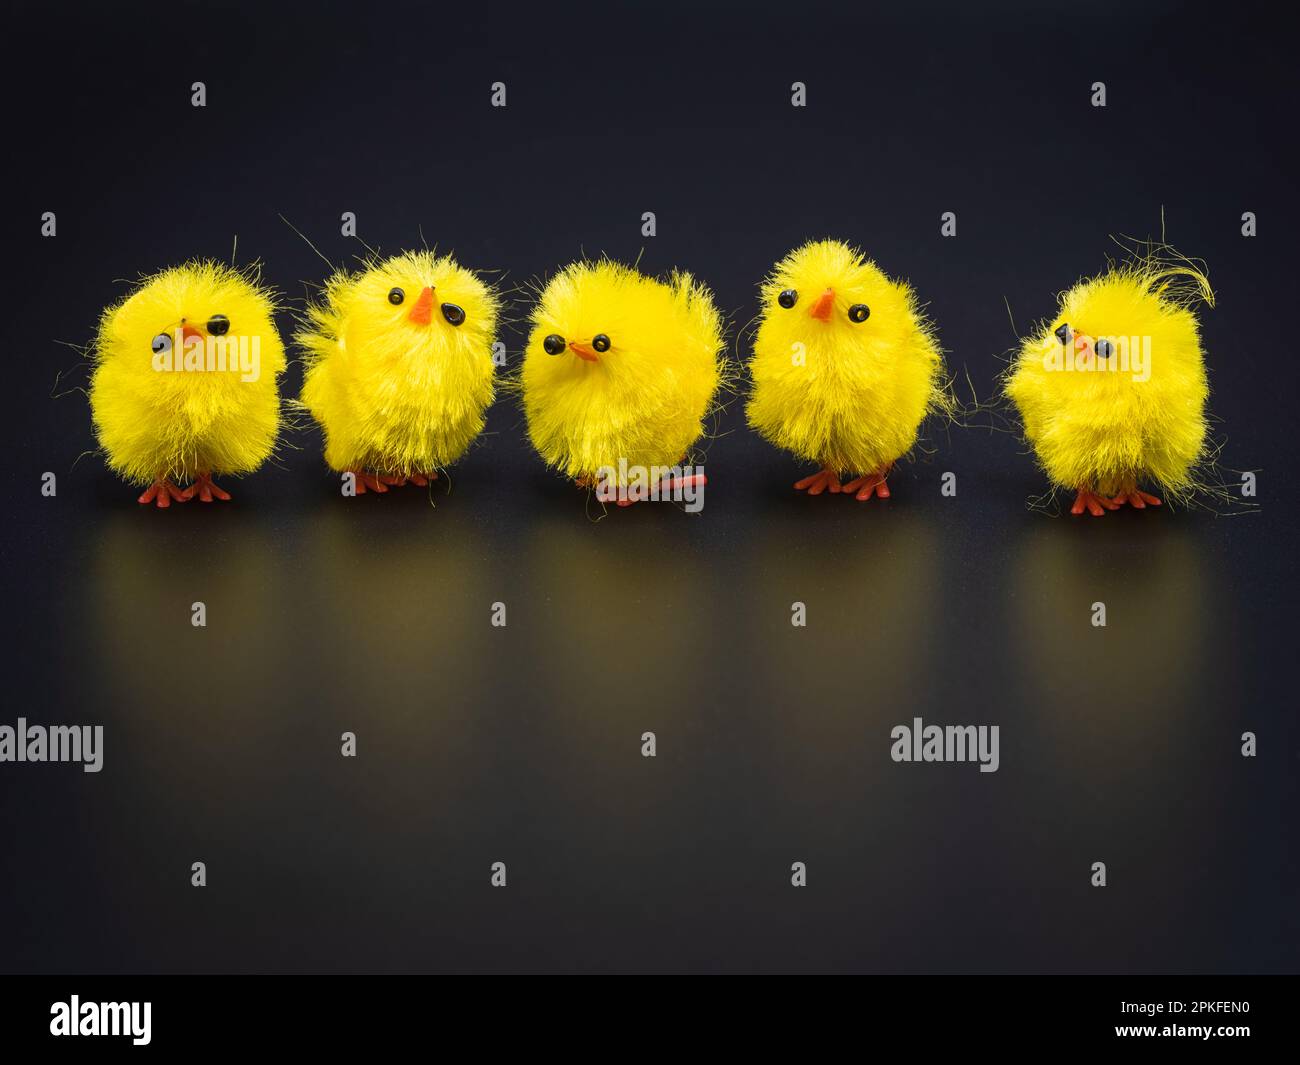 A row of little fluffy yellow chickens, arranged for Easter decoration in a studio - perfect macro photography subject with no people. Stock Photo